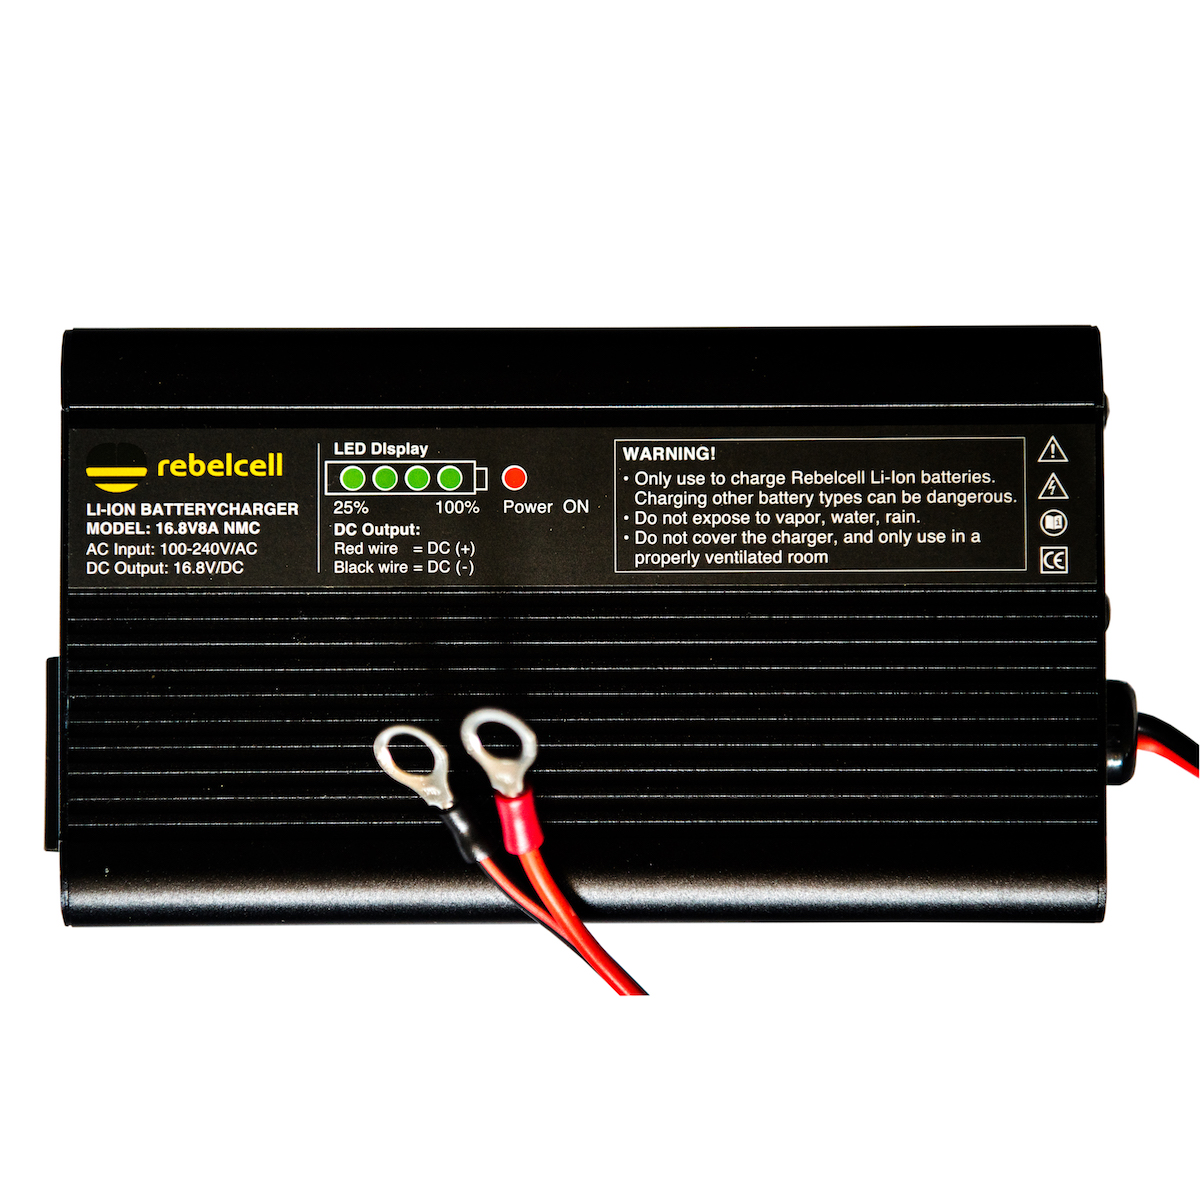 Rebelcell charger 16.8V8A product image